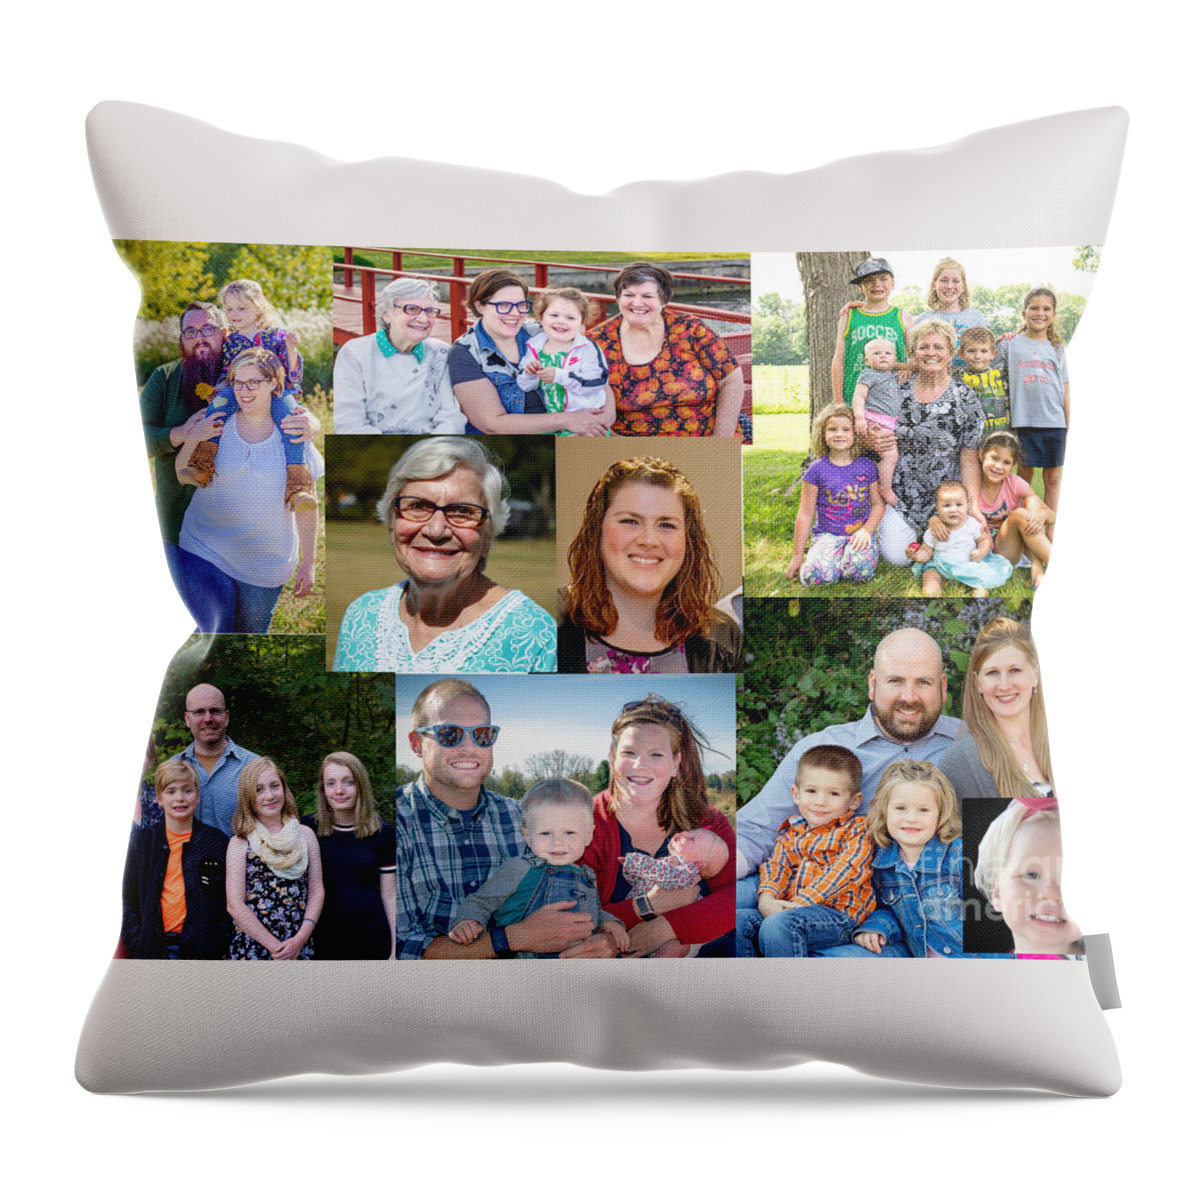  Throw Pillow featuring the photograph Family by Judy Rogero